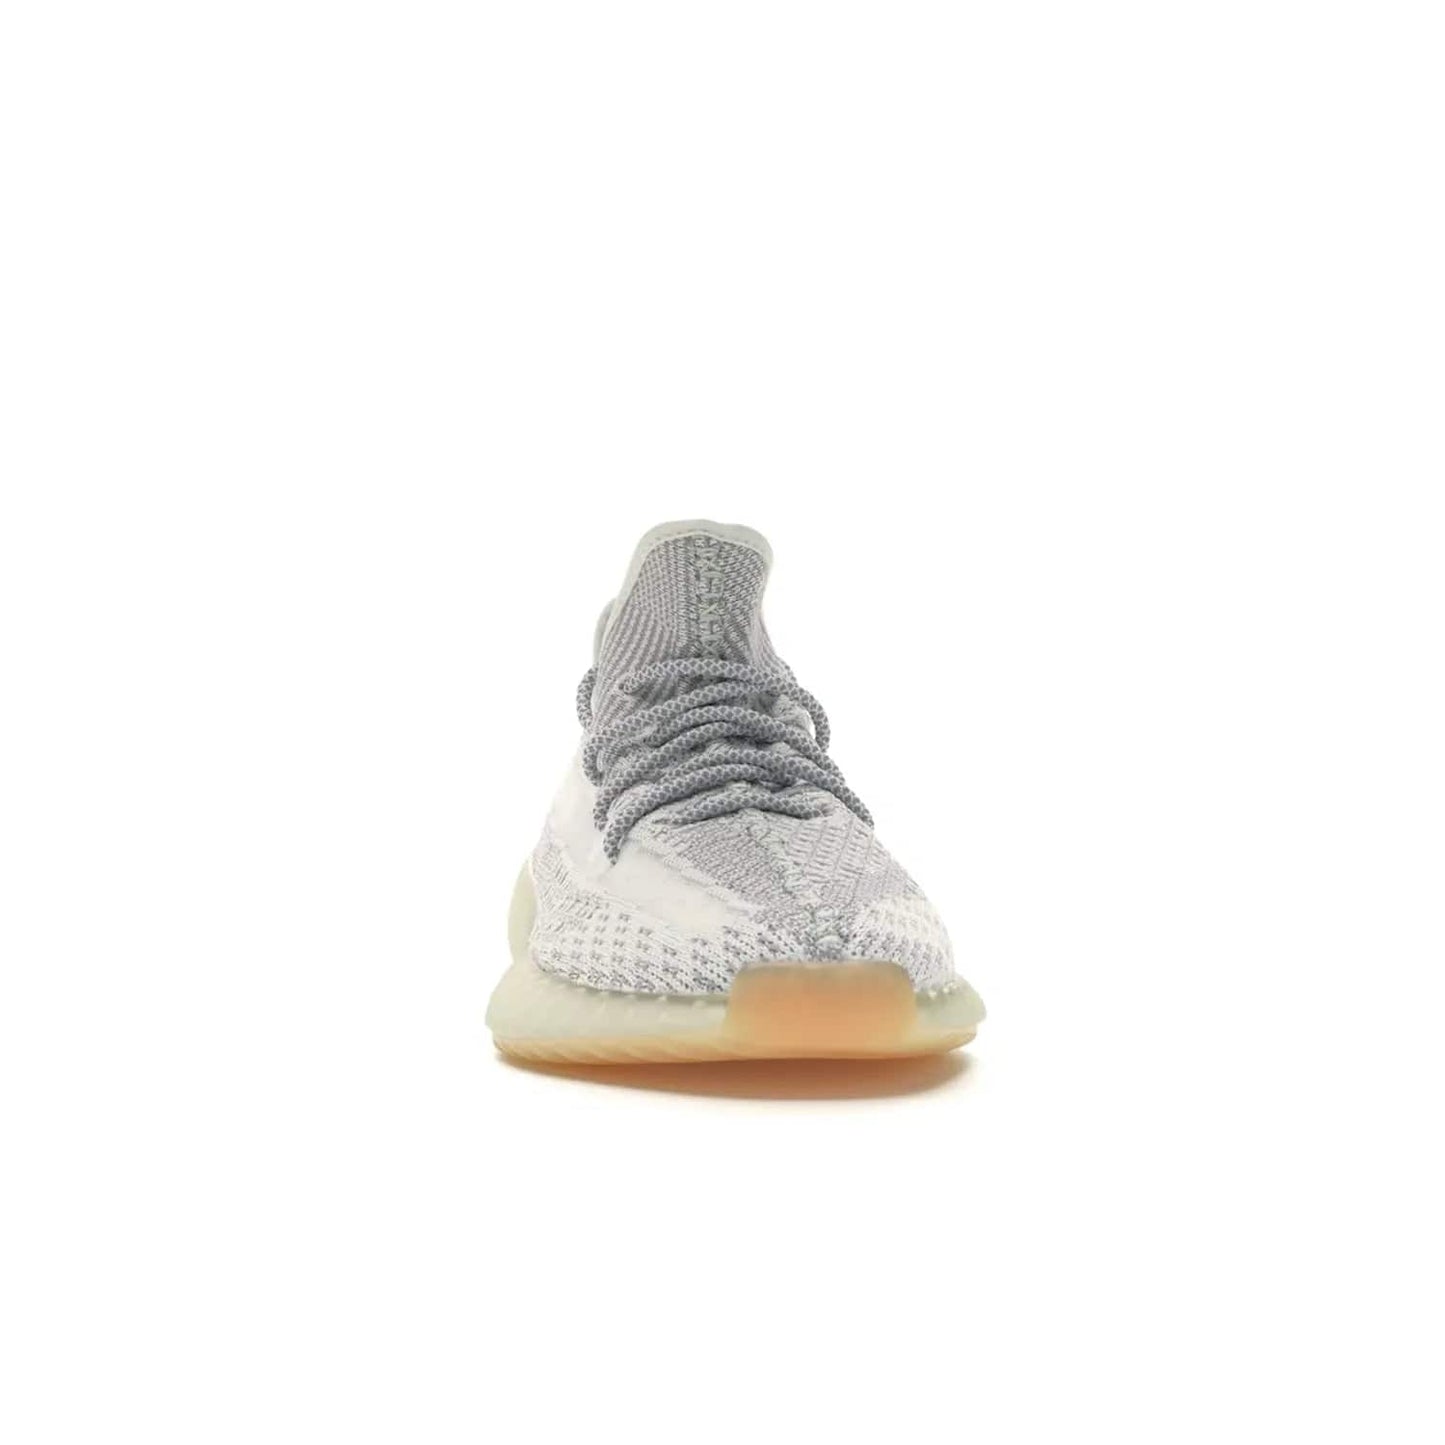 adidas Yeezy Boost 350 V2 Yeshaya (Non-Reflective) - Image 9 - Only at www.BallersClubKickz.com - Step out in style with the adidas Yeezy Boost 350 V2 Yeshaya (Non-Reflective). Gray-and-white Primeknit upper with mesh side stripe & rope laces, plus a translucent Boost sole with a hint of yellow. Make a statement and feel comfortable with this stylish sneaker.